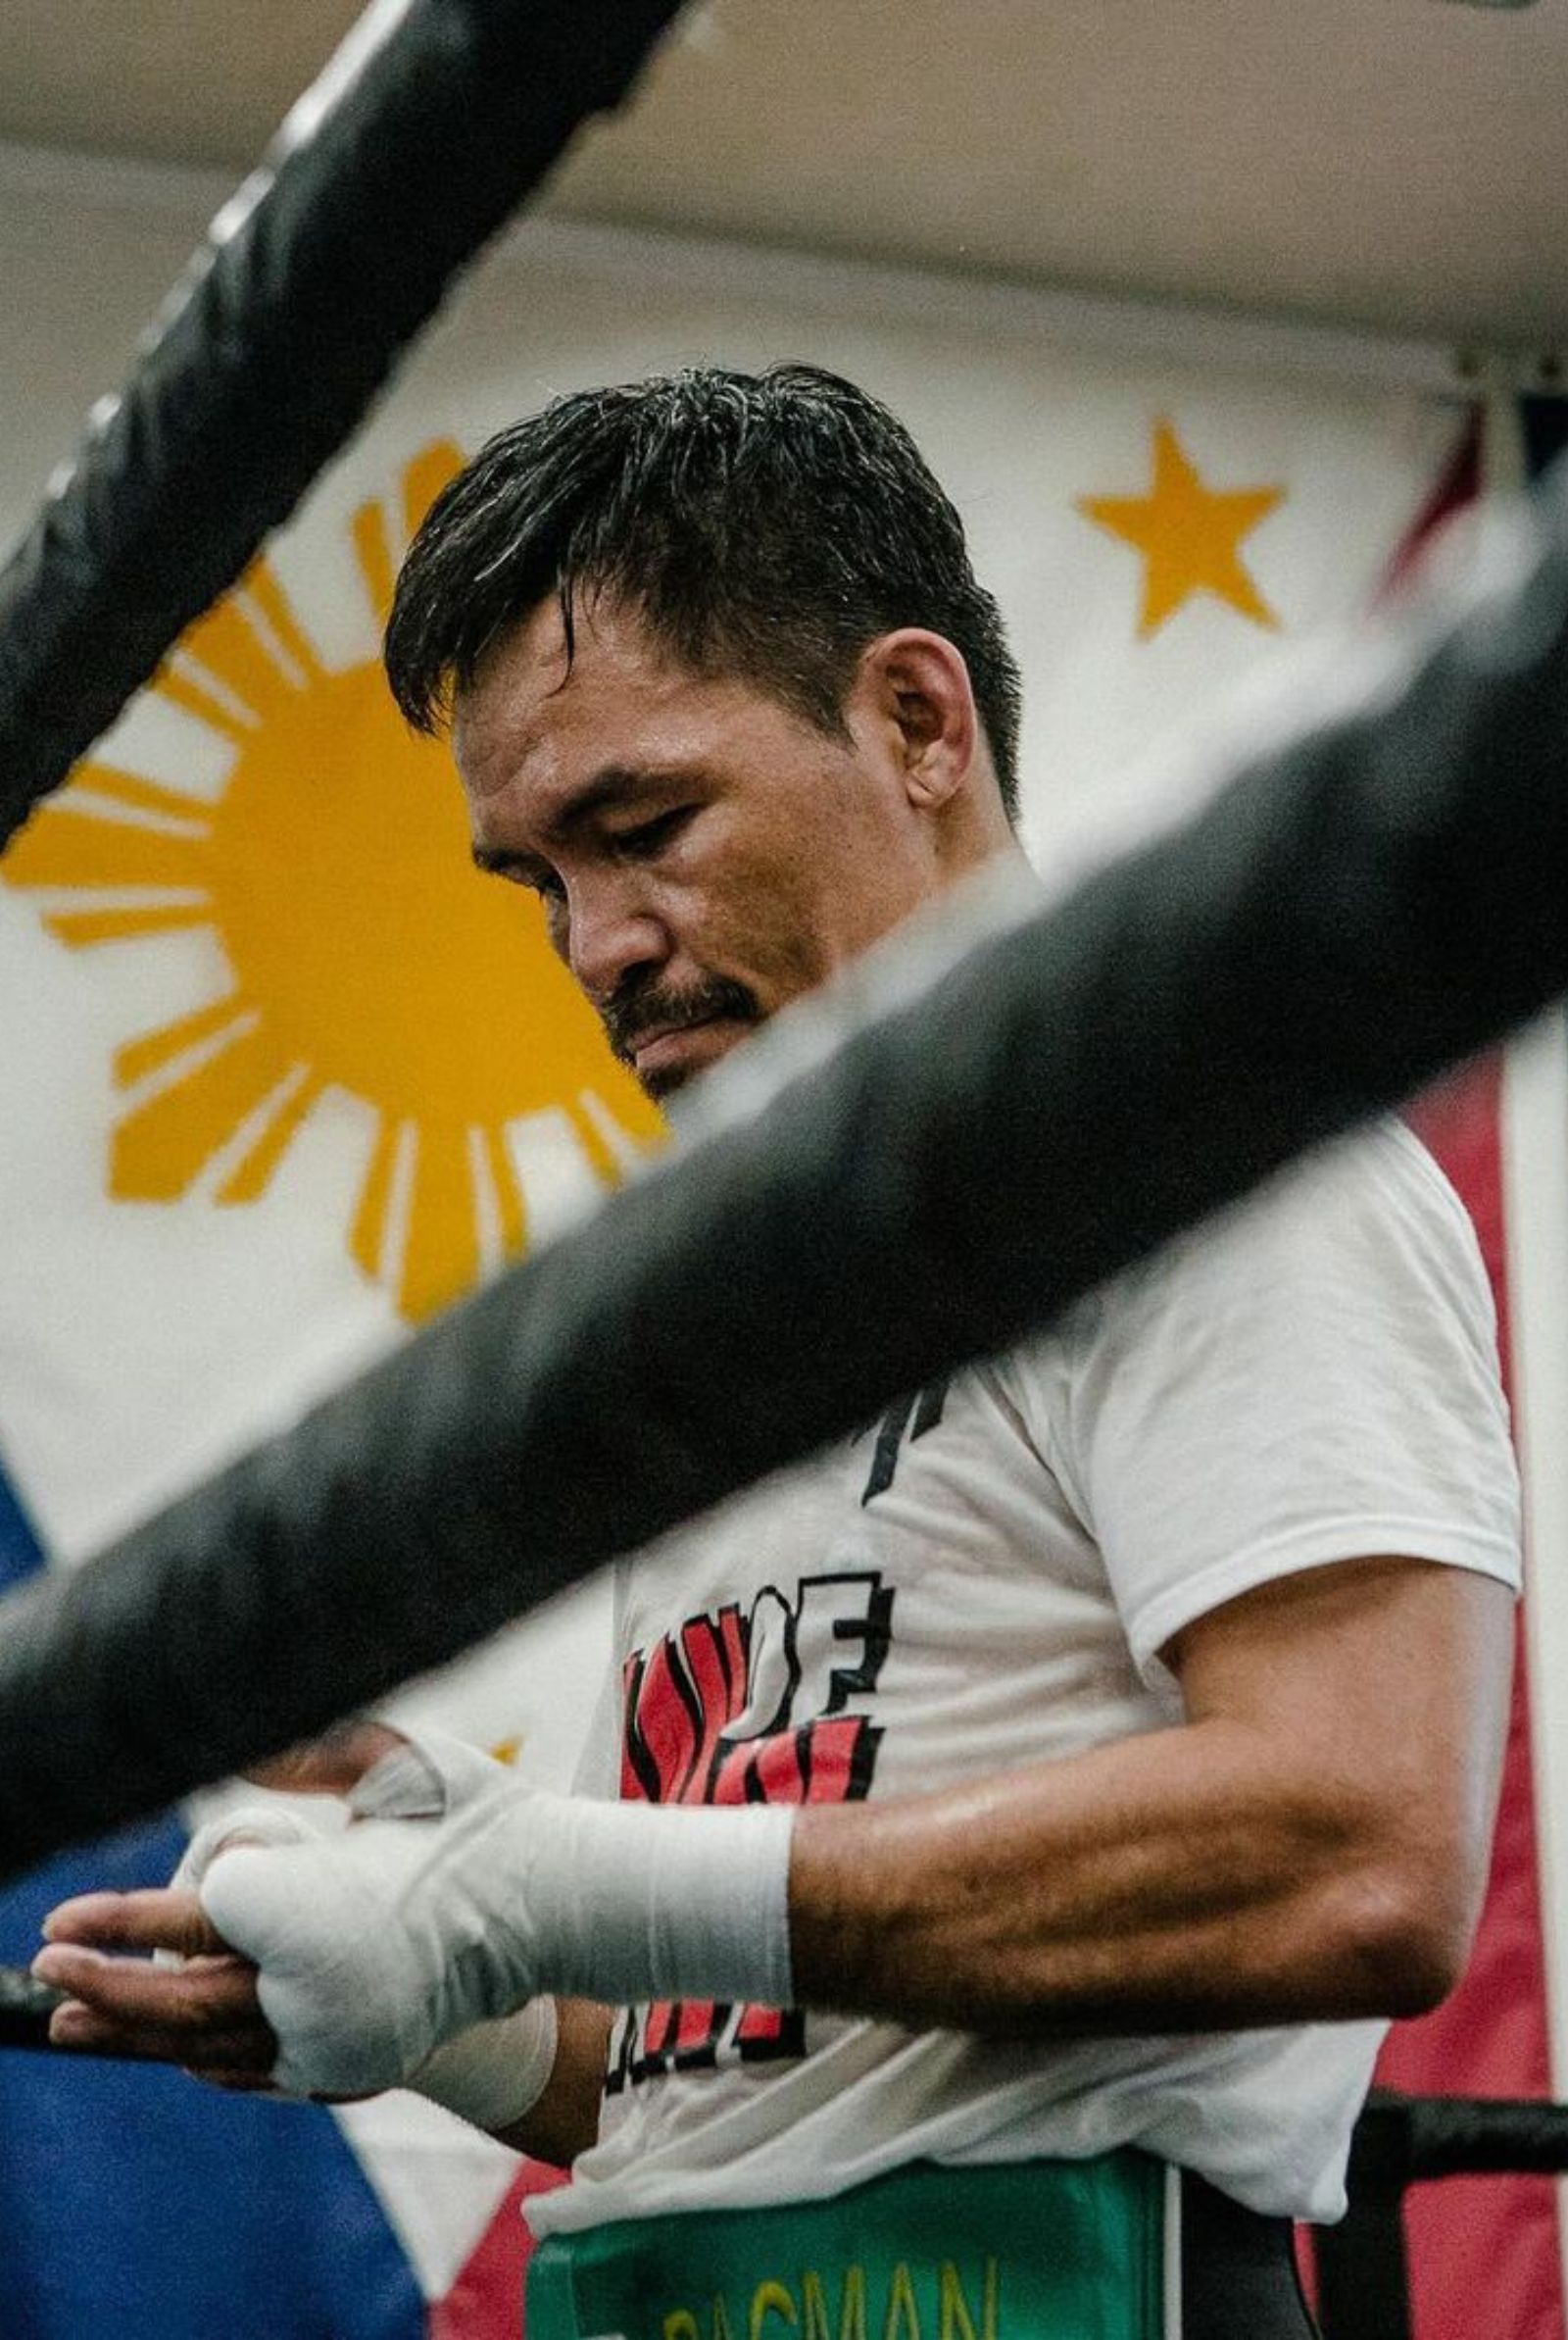 5 Reasons Why Pacquiao and Mayweather's Rematch is History in the Making - Manny Pacquiao trains at Freddie Roach's Wild Card Boxing